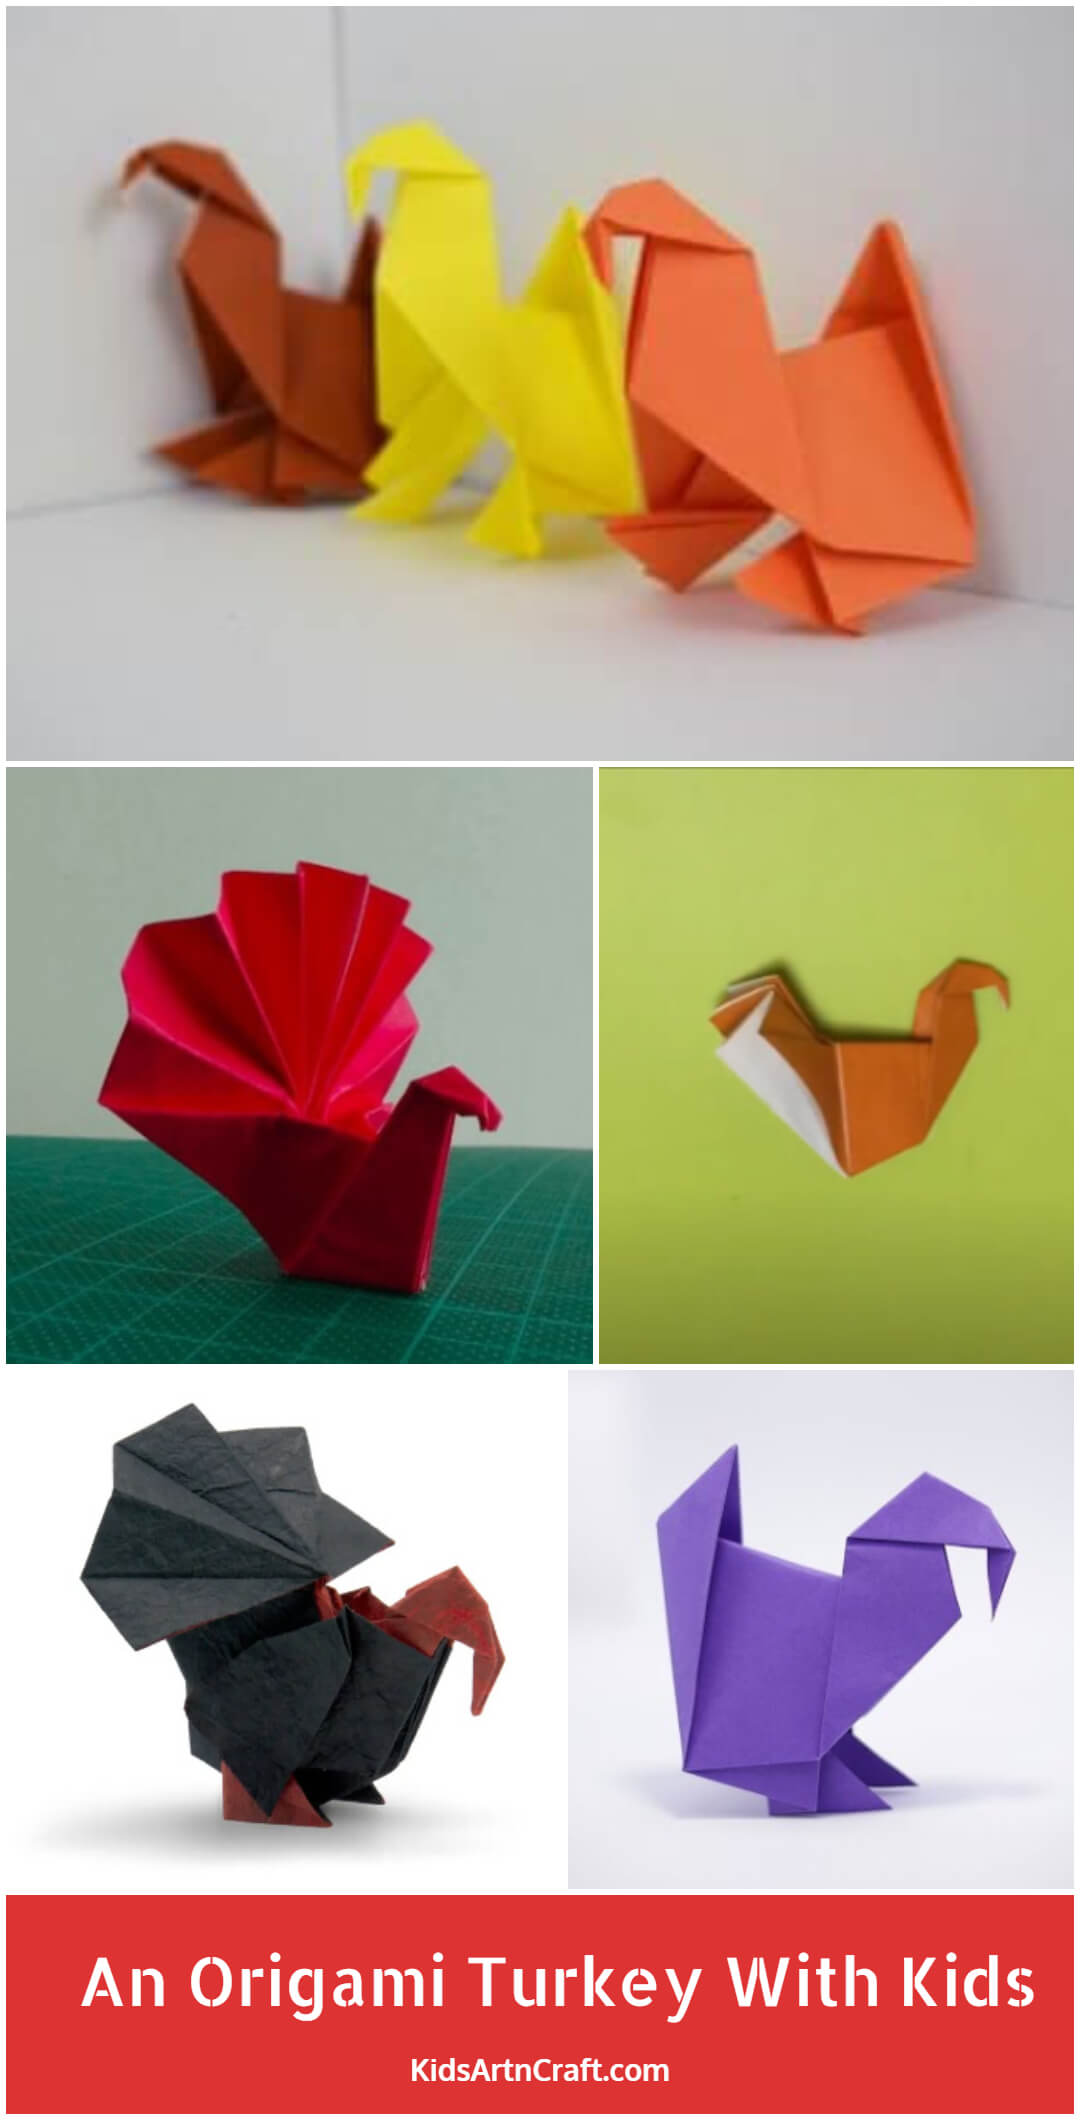 How To Make An Origami Turkey With Kids